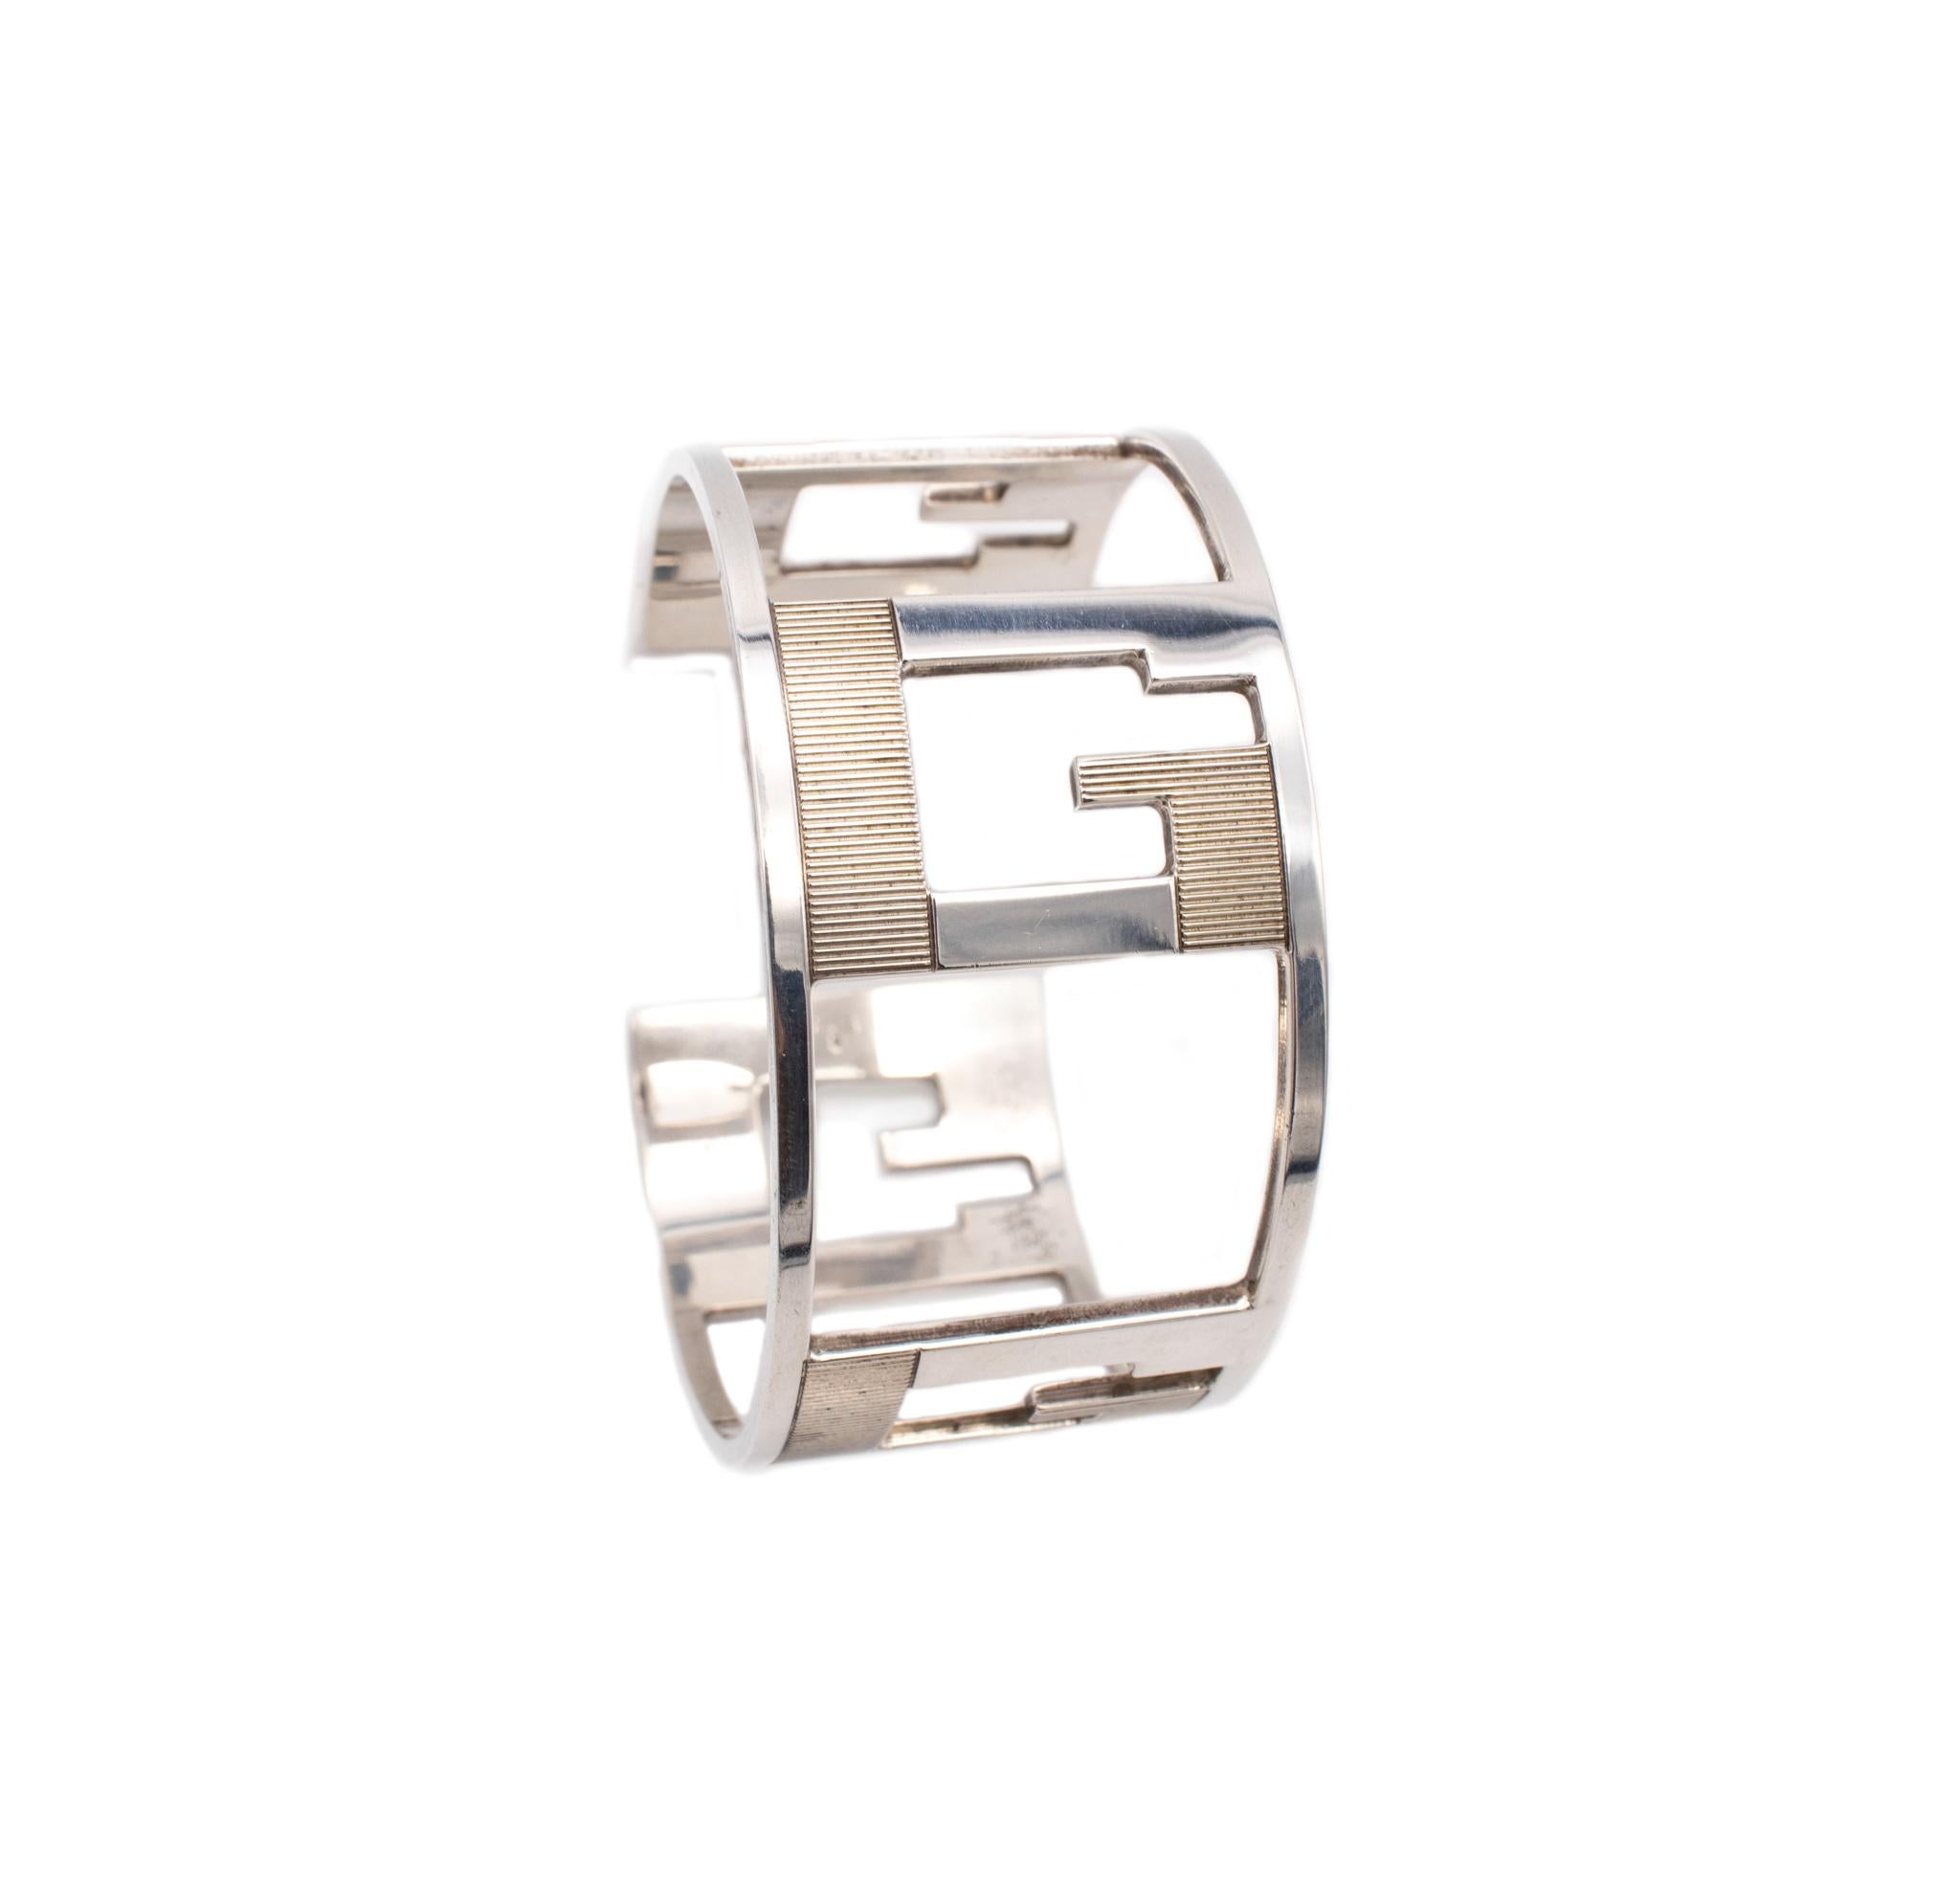 Geometric cuff bracelet designed by Gucci.

A vintage piece, crafted in Firenze, Italy in solid .925/,999 sterling silver and the surfaces are finished with high polish. IS embellished with the four iconic textured G's. patterns.

Has a total weight